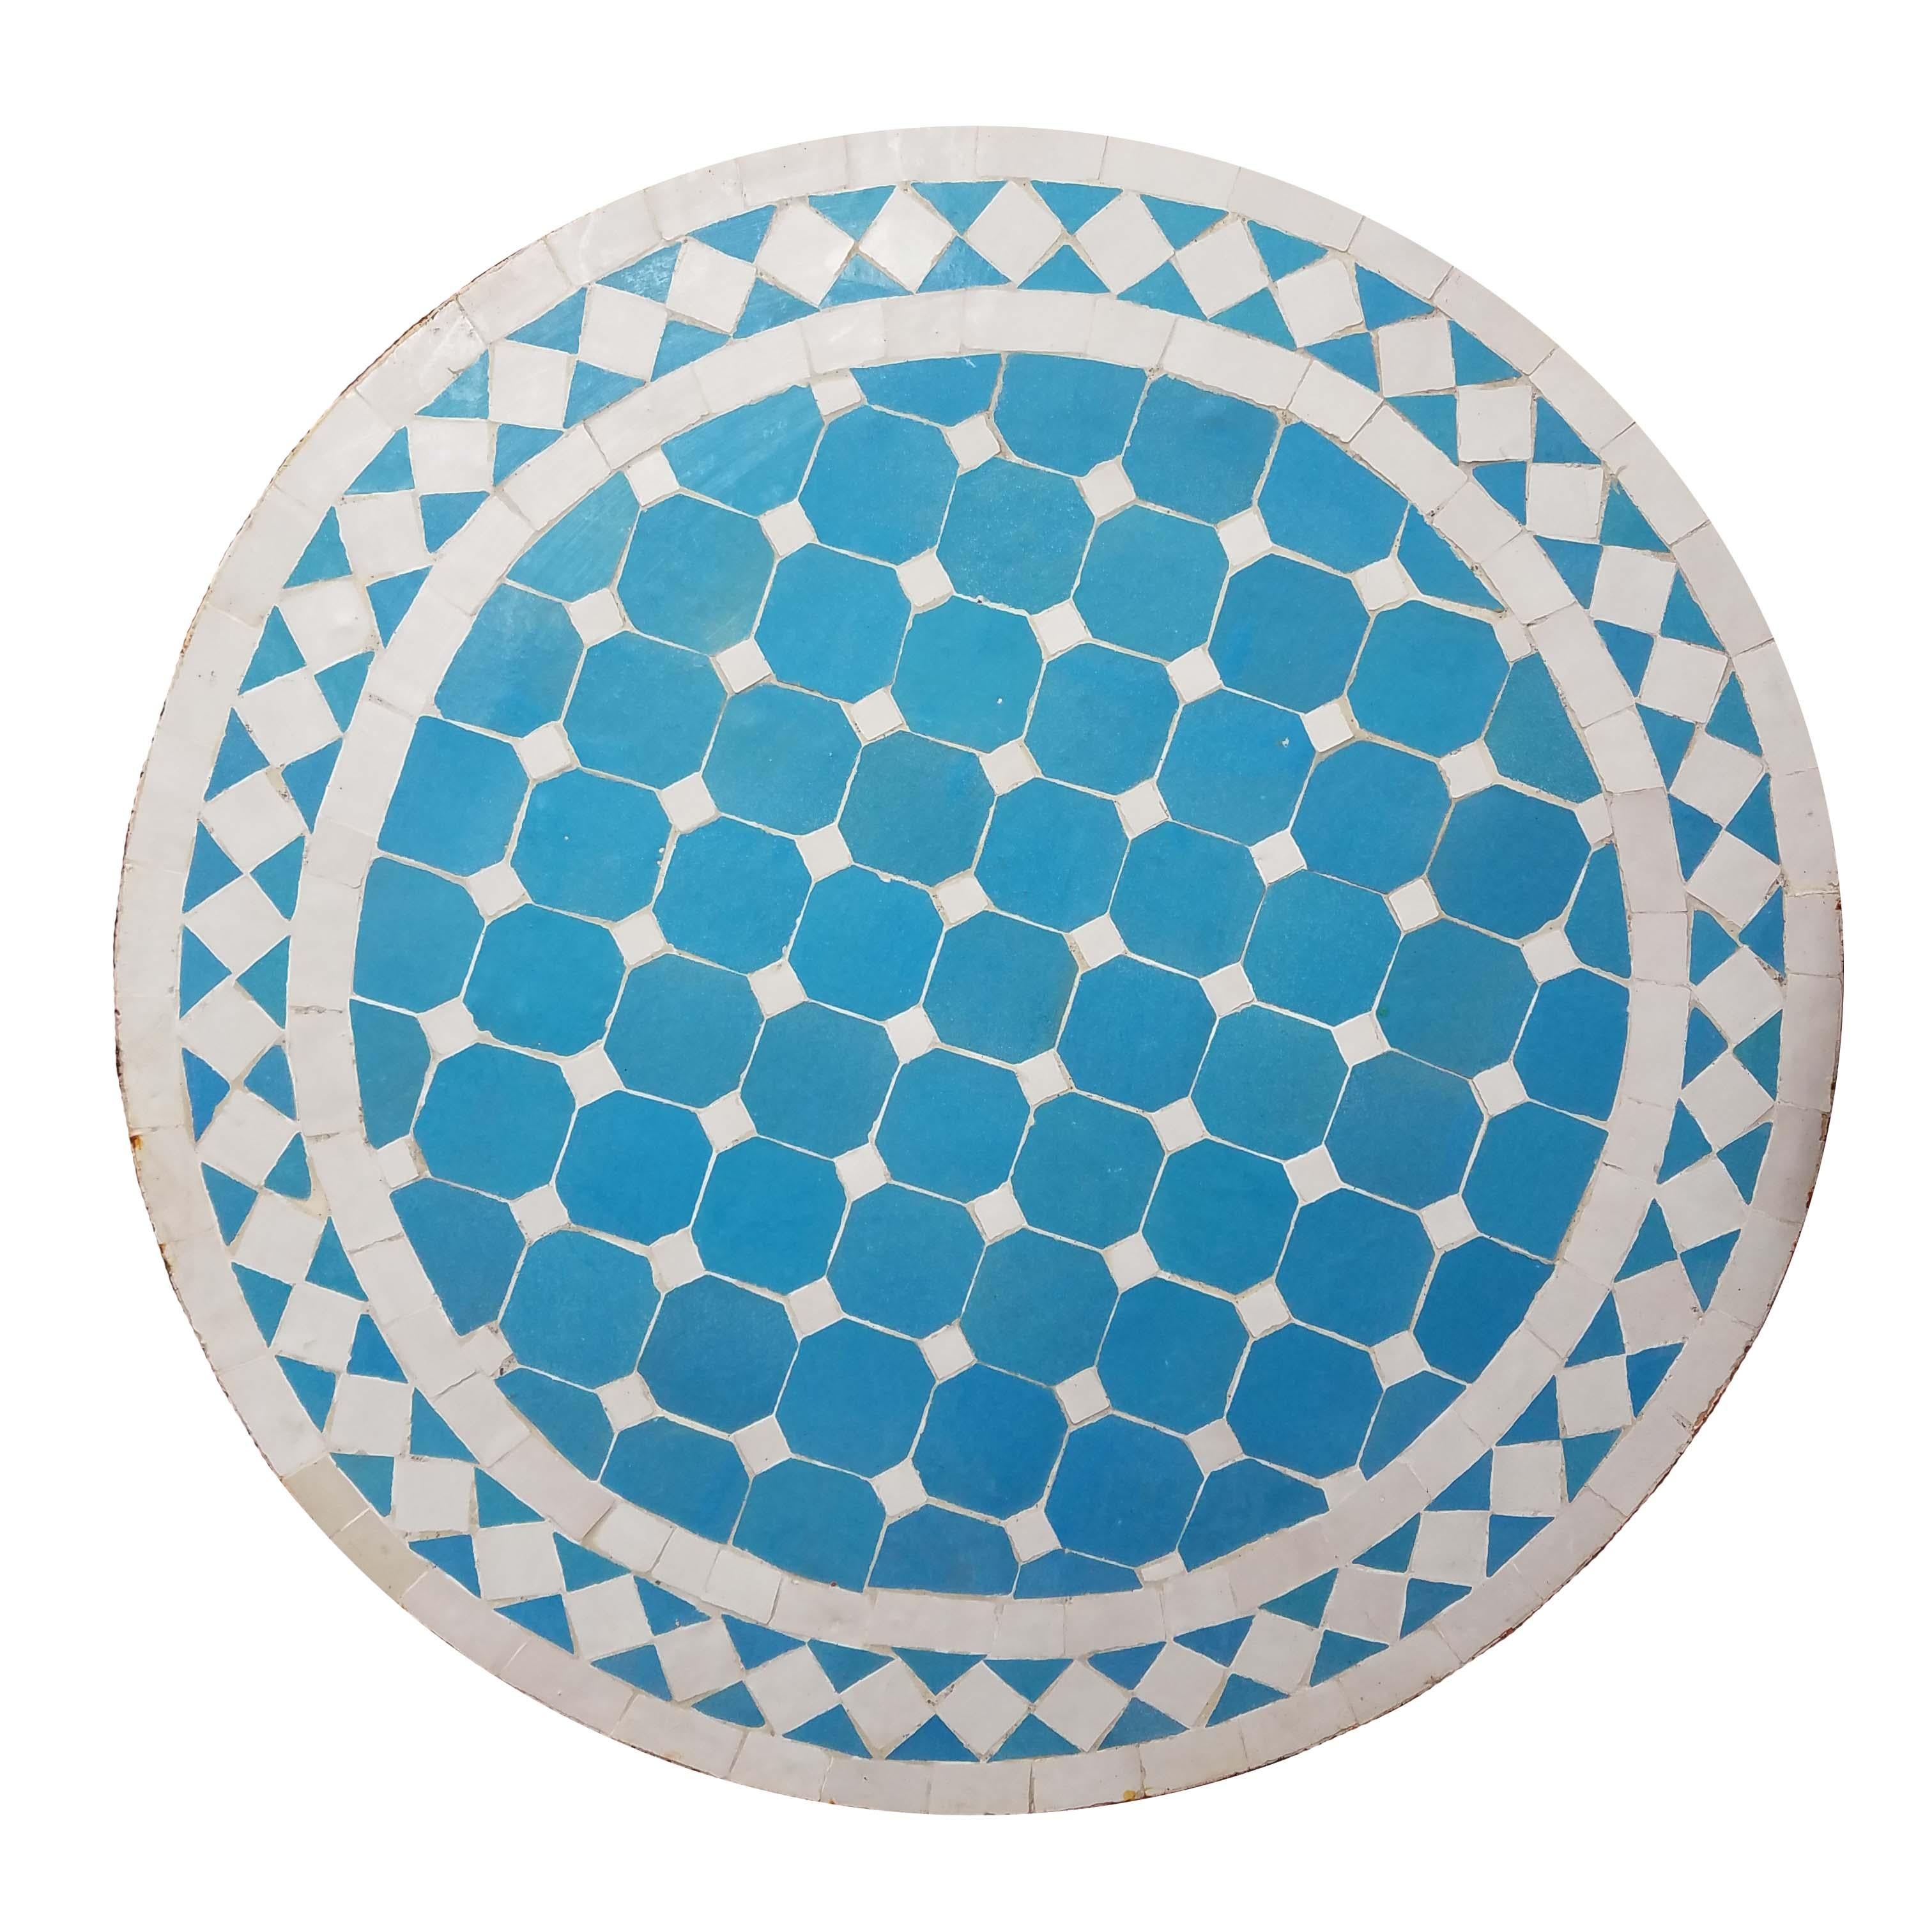 Turquoise / White Moroccan Mosaic Table - CR4 2